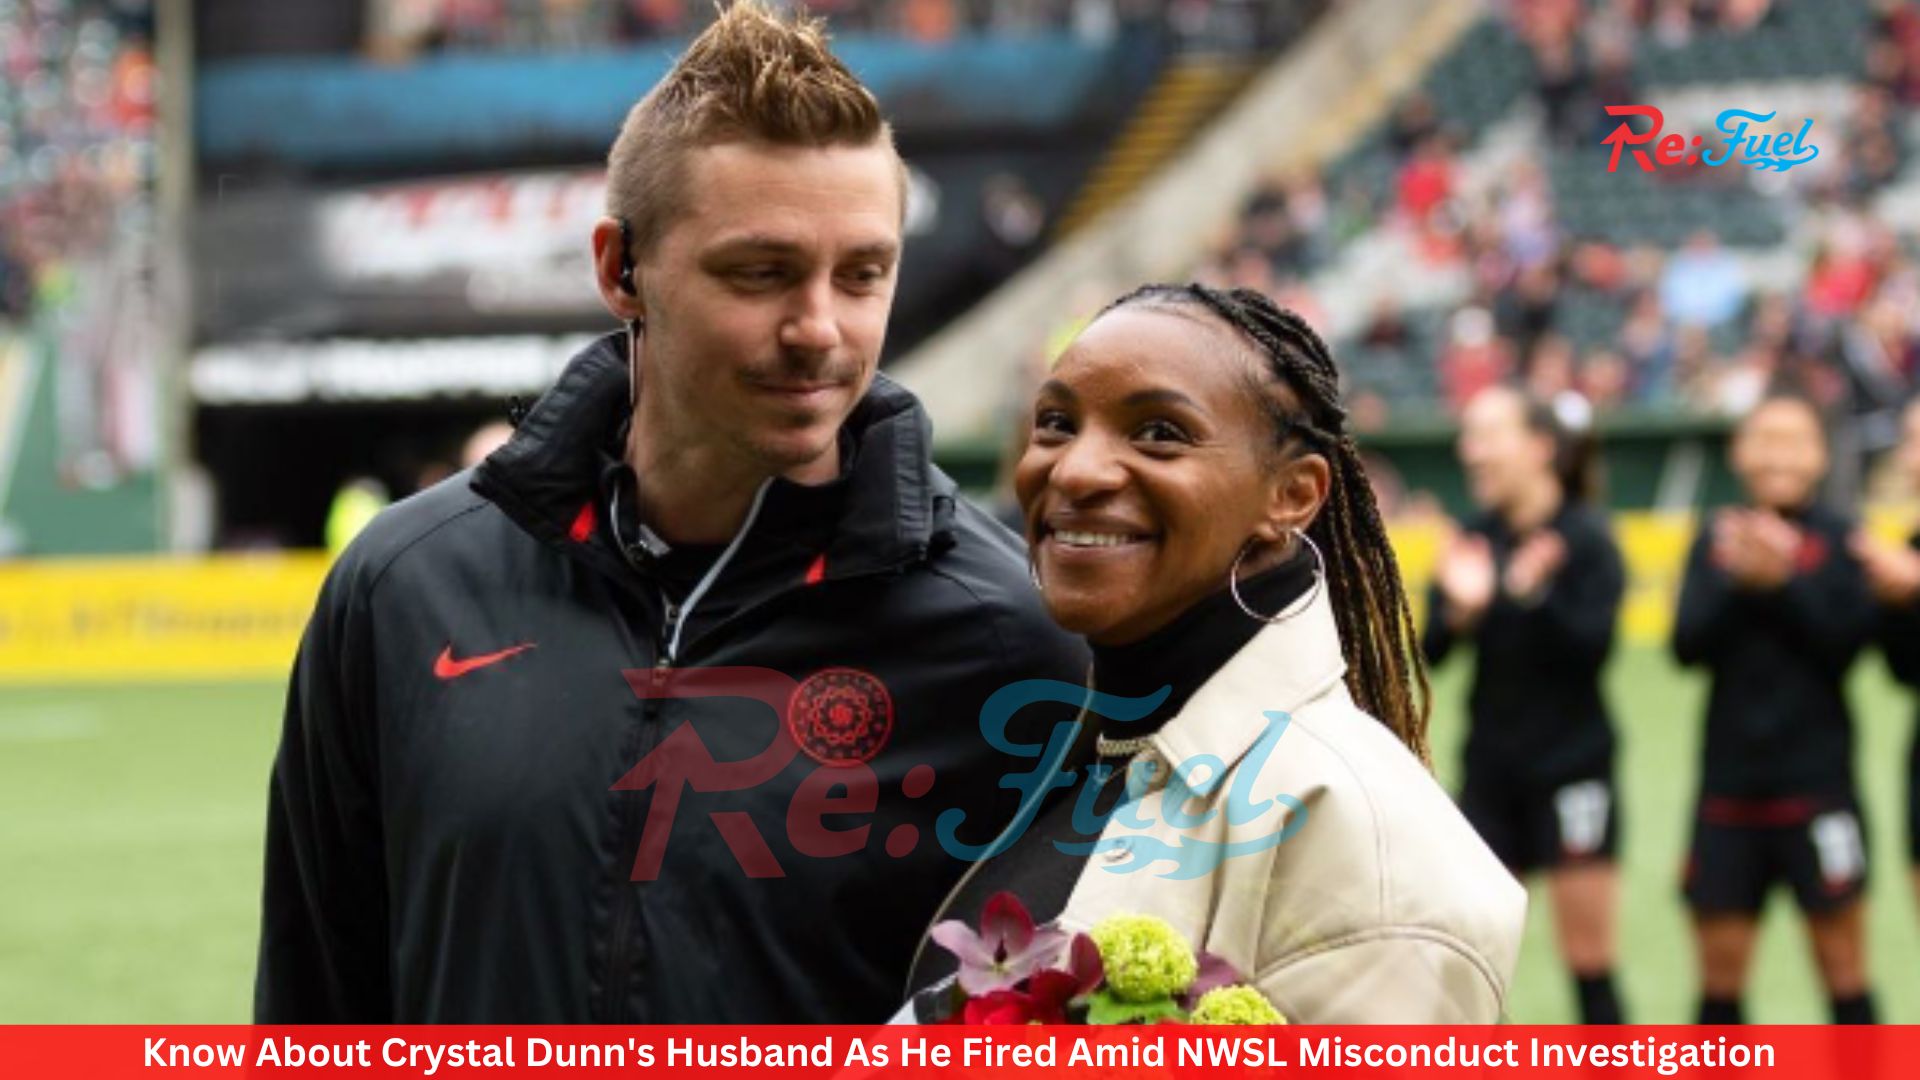 Know About Crystal Dunn's Husband As He Fired Amid NWSL Misconduct Investigation